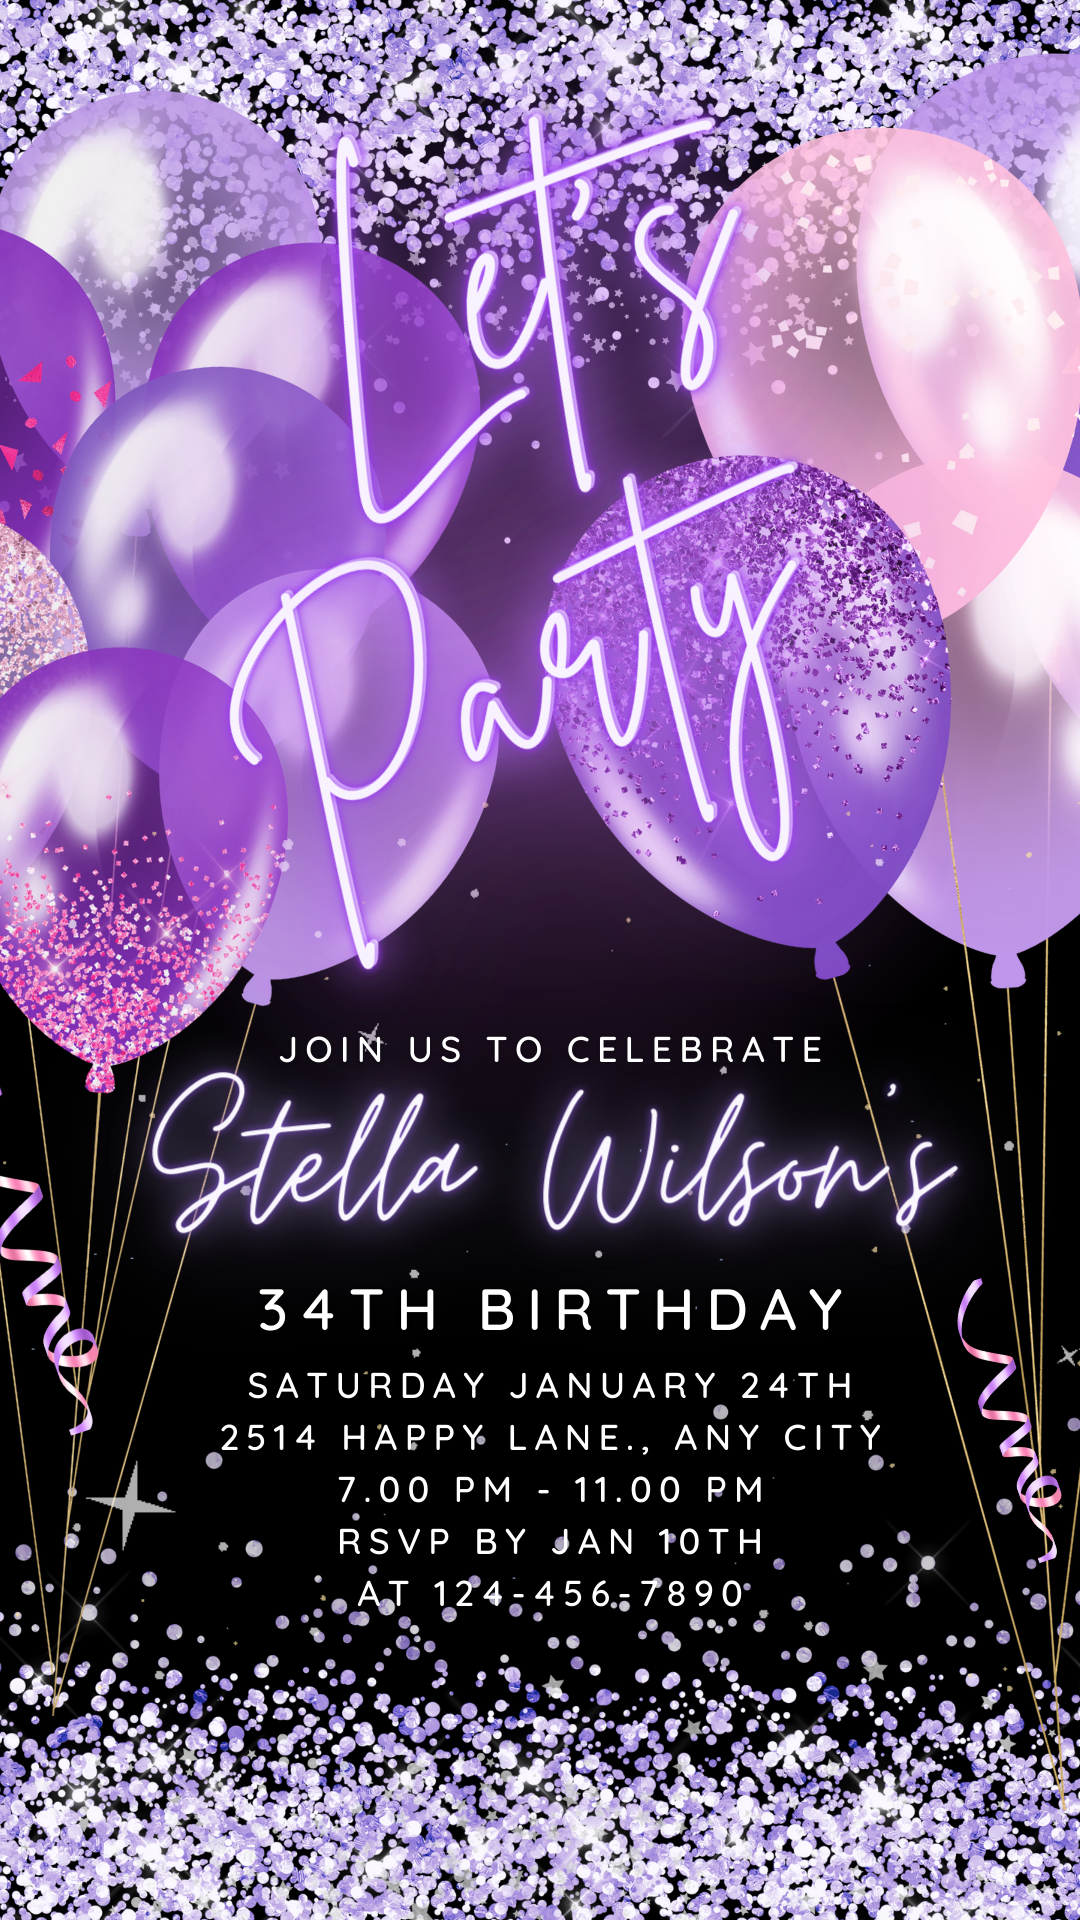 Purple Balloon Glittery Invite for any Party Events, Celebrate Retirement, Birthday, Anniversary with Editable Video Invitation Template